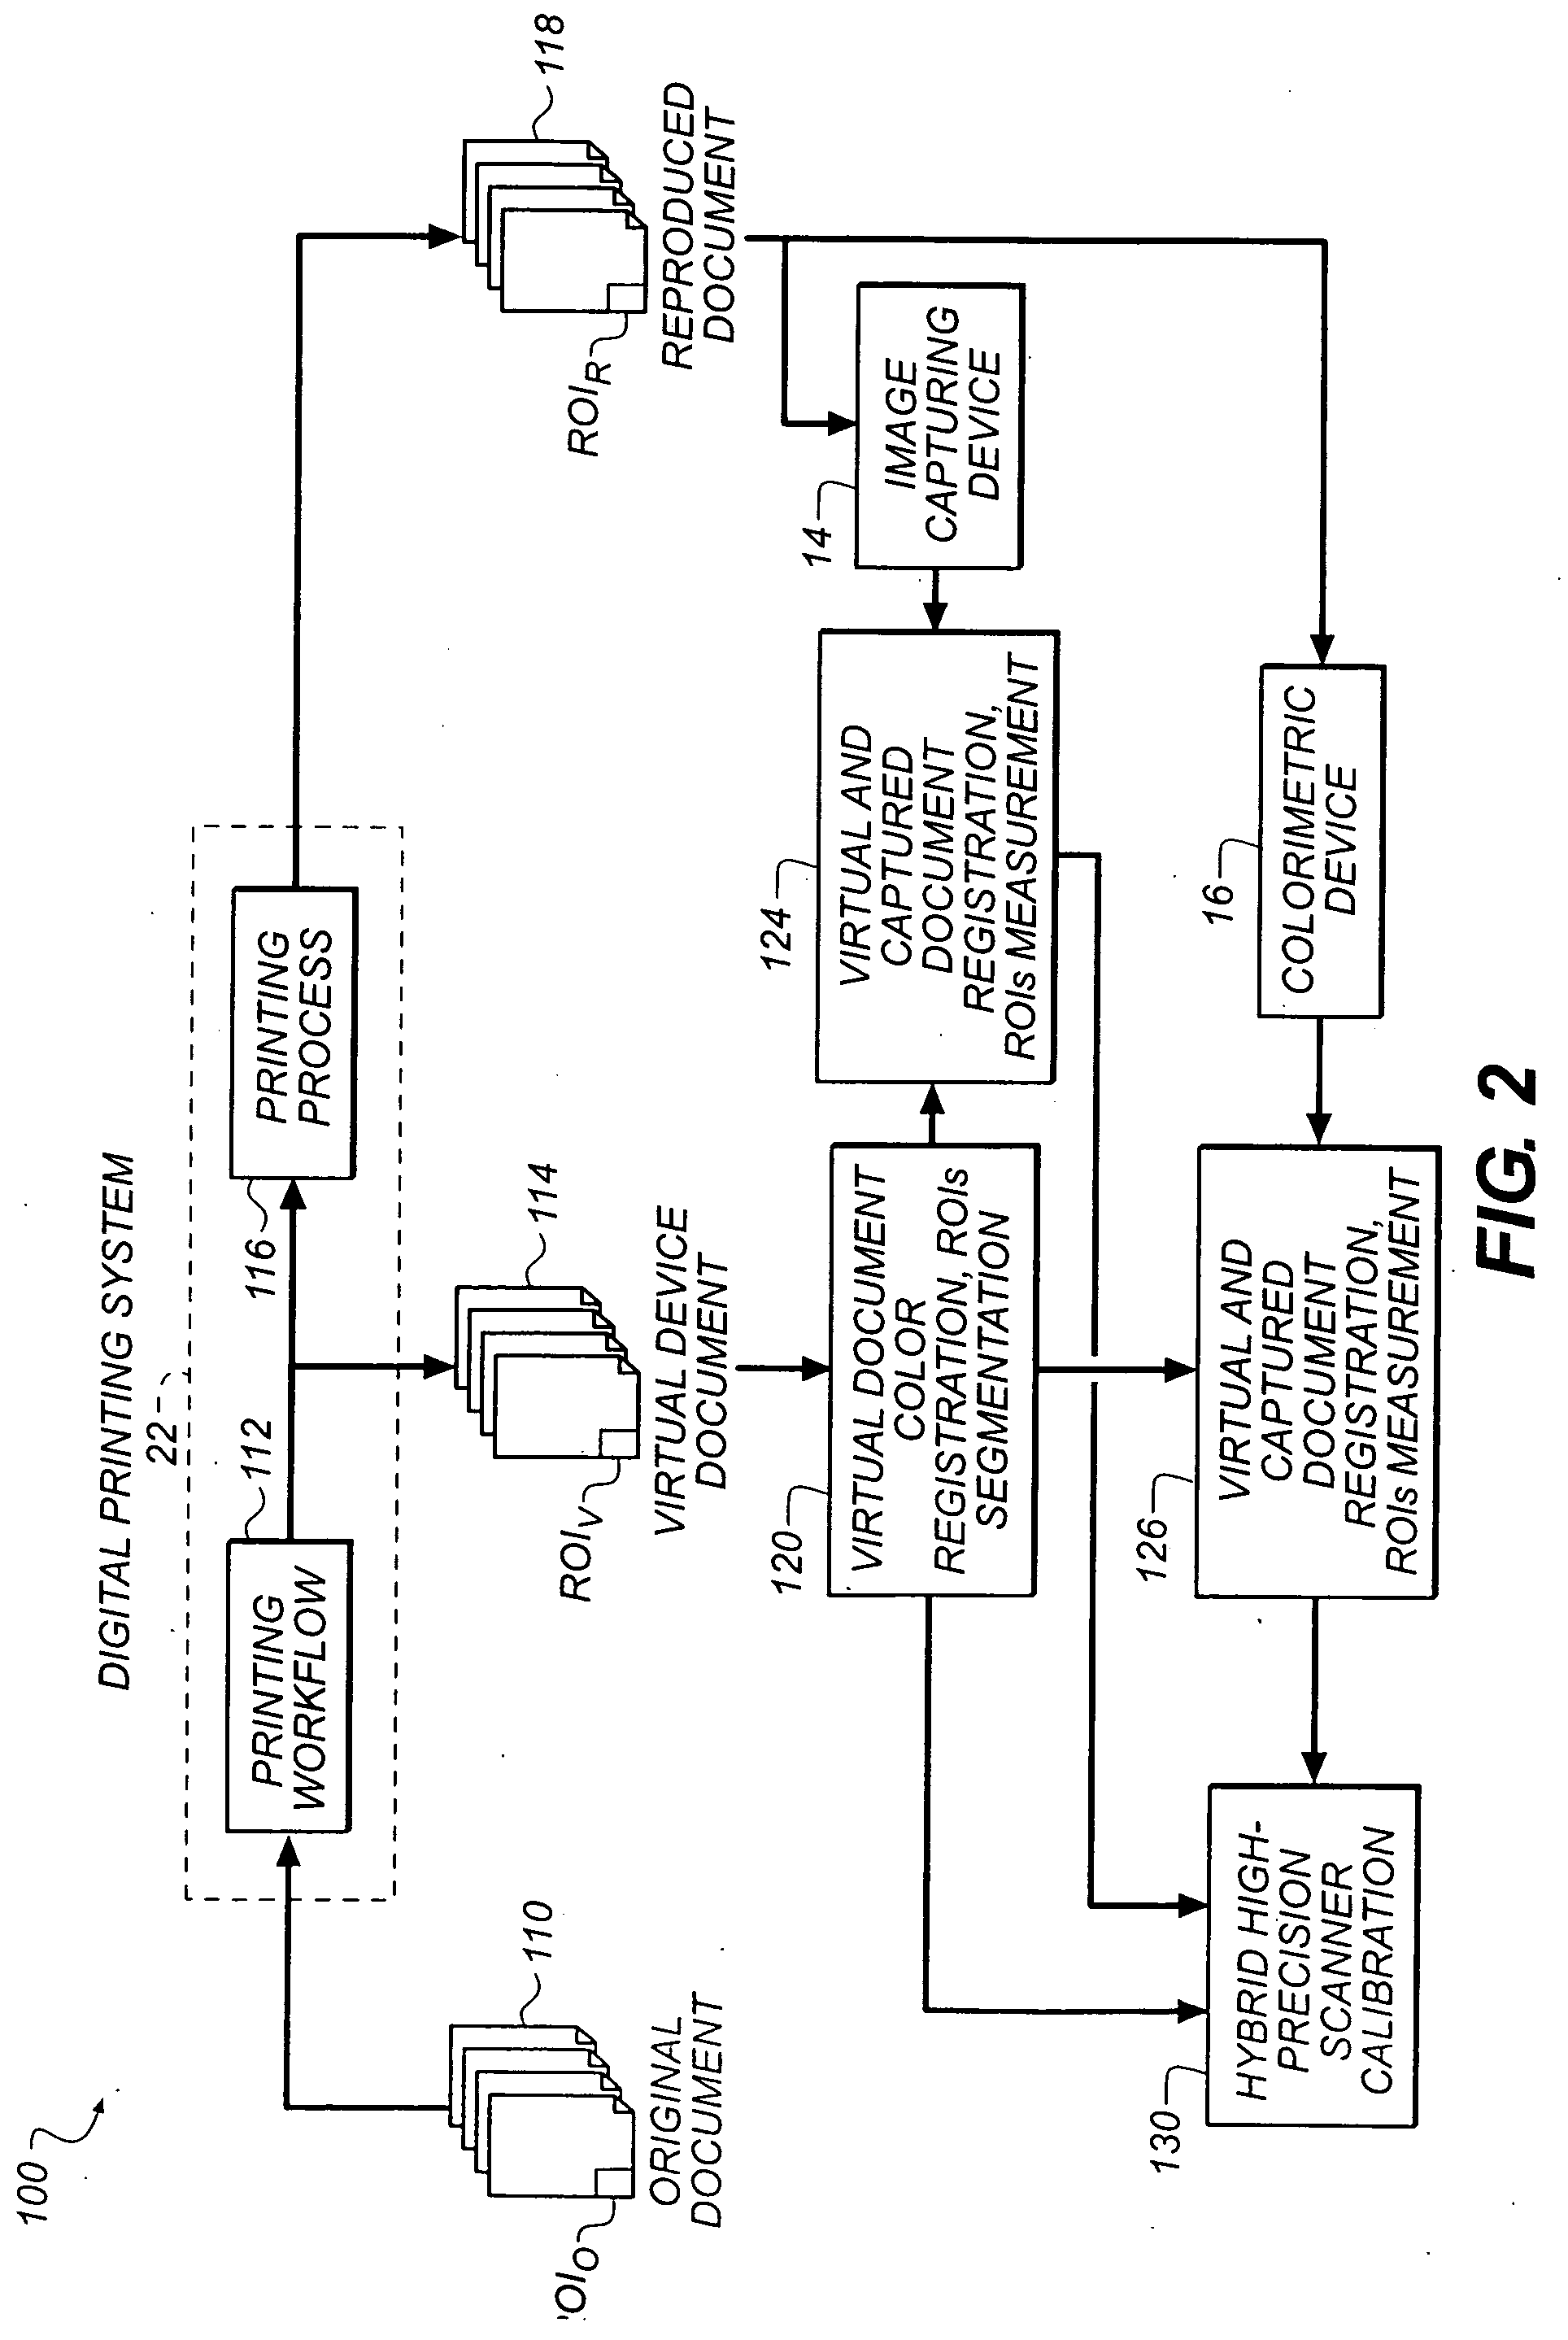 Image control system and method